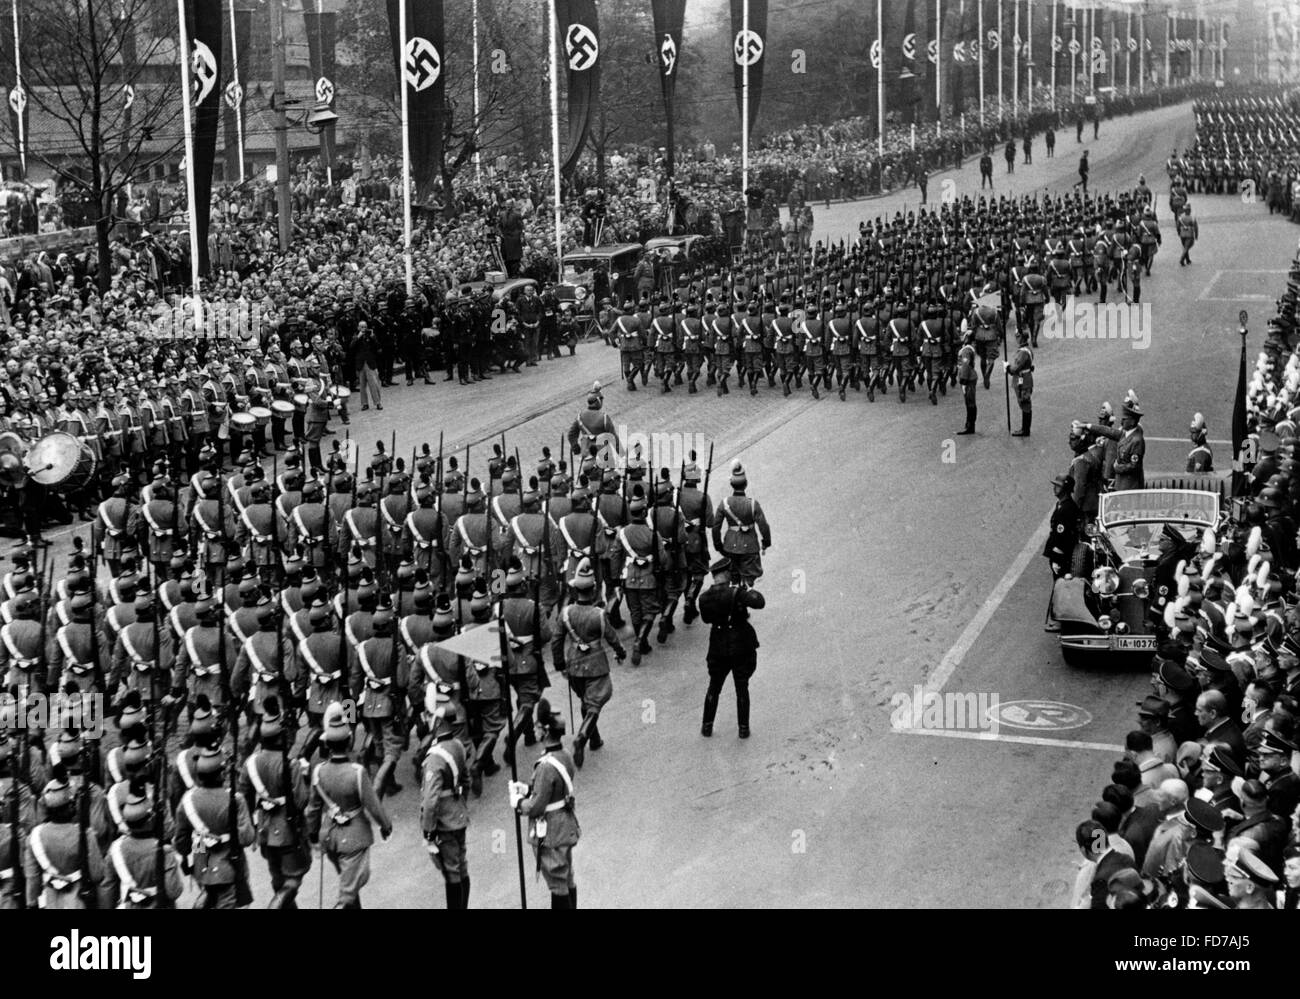 Police parade in front of the Fuehrer, 1930er Stock Photo